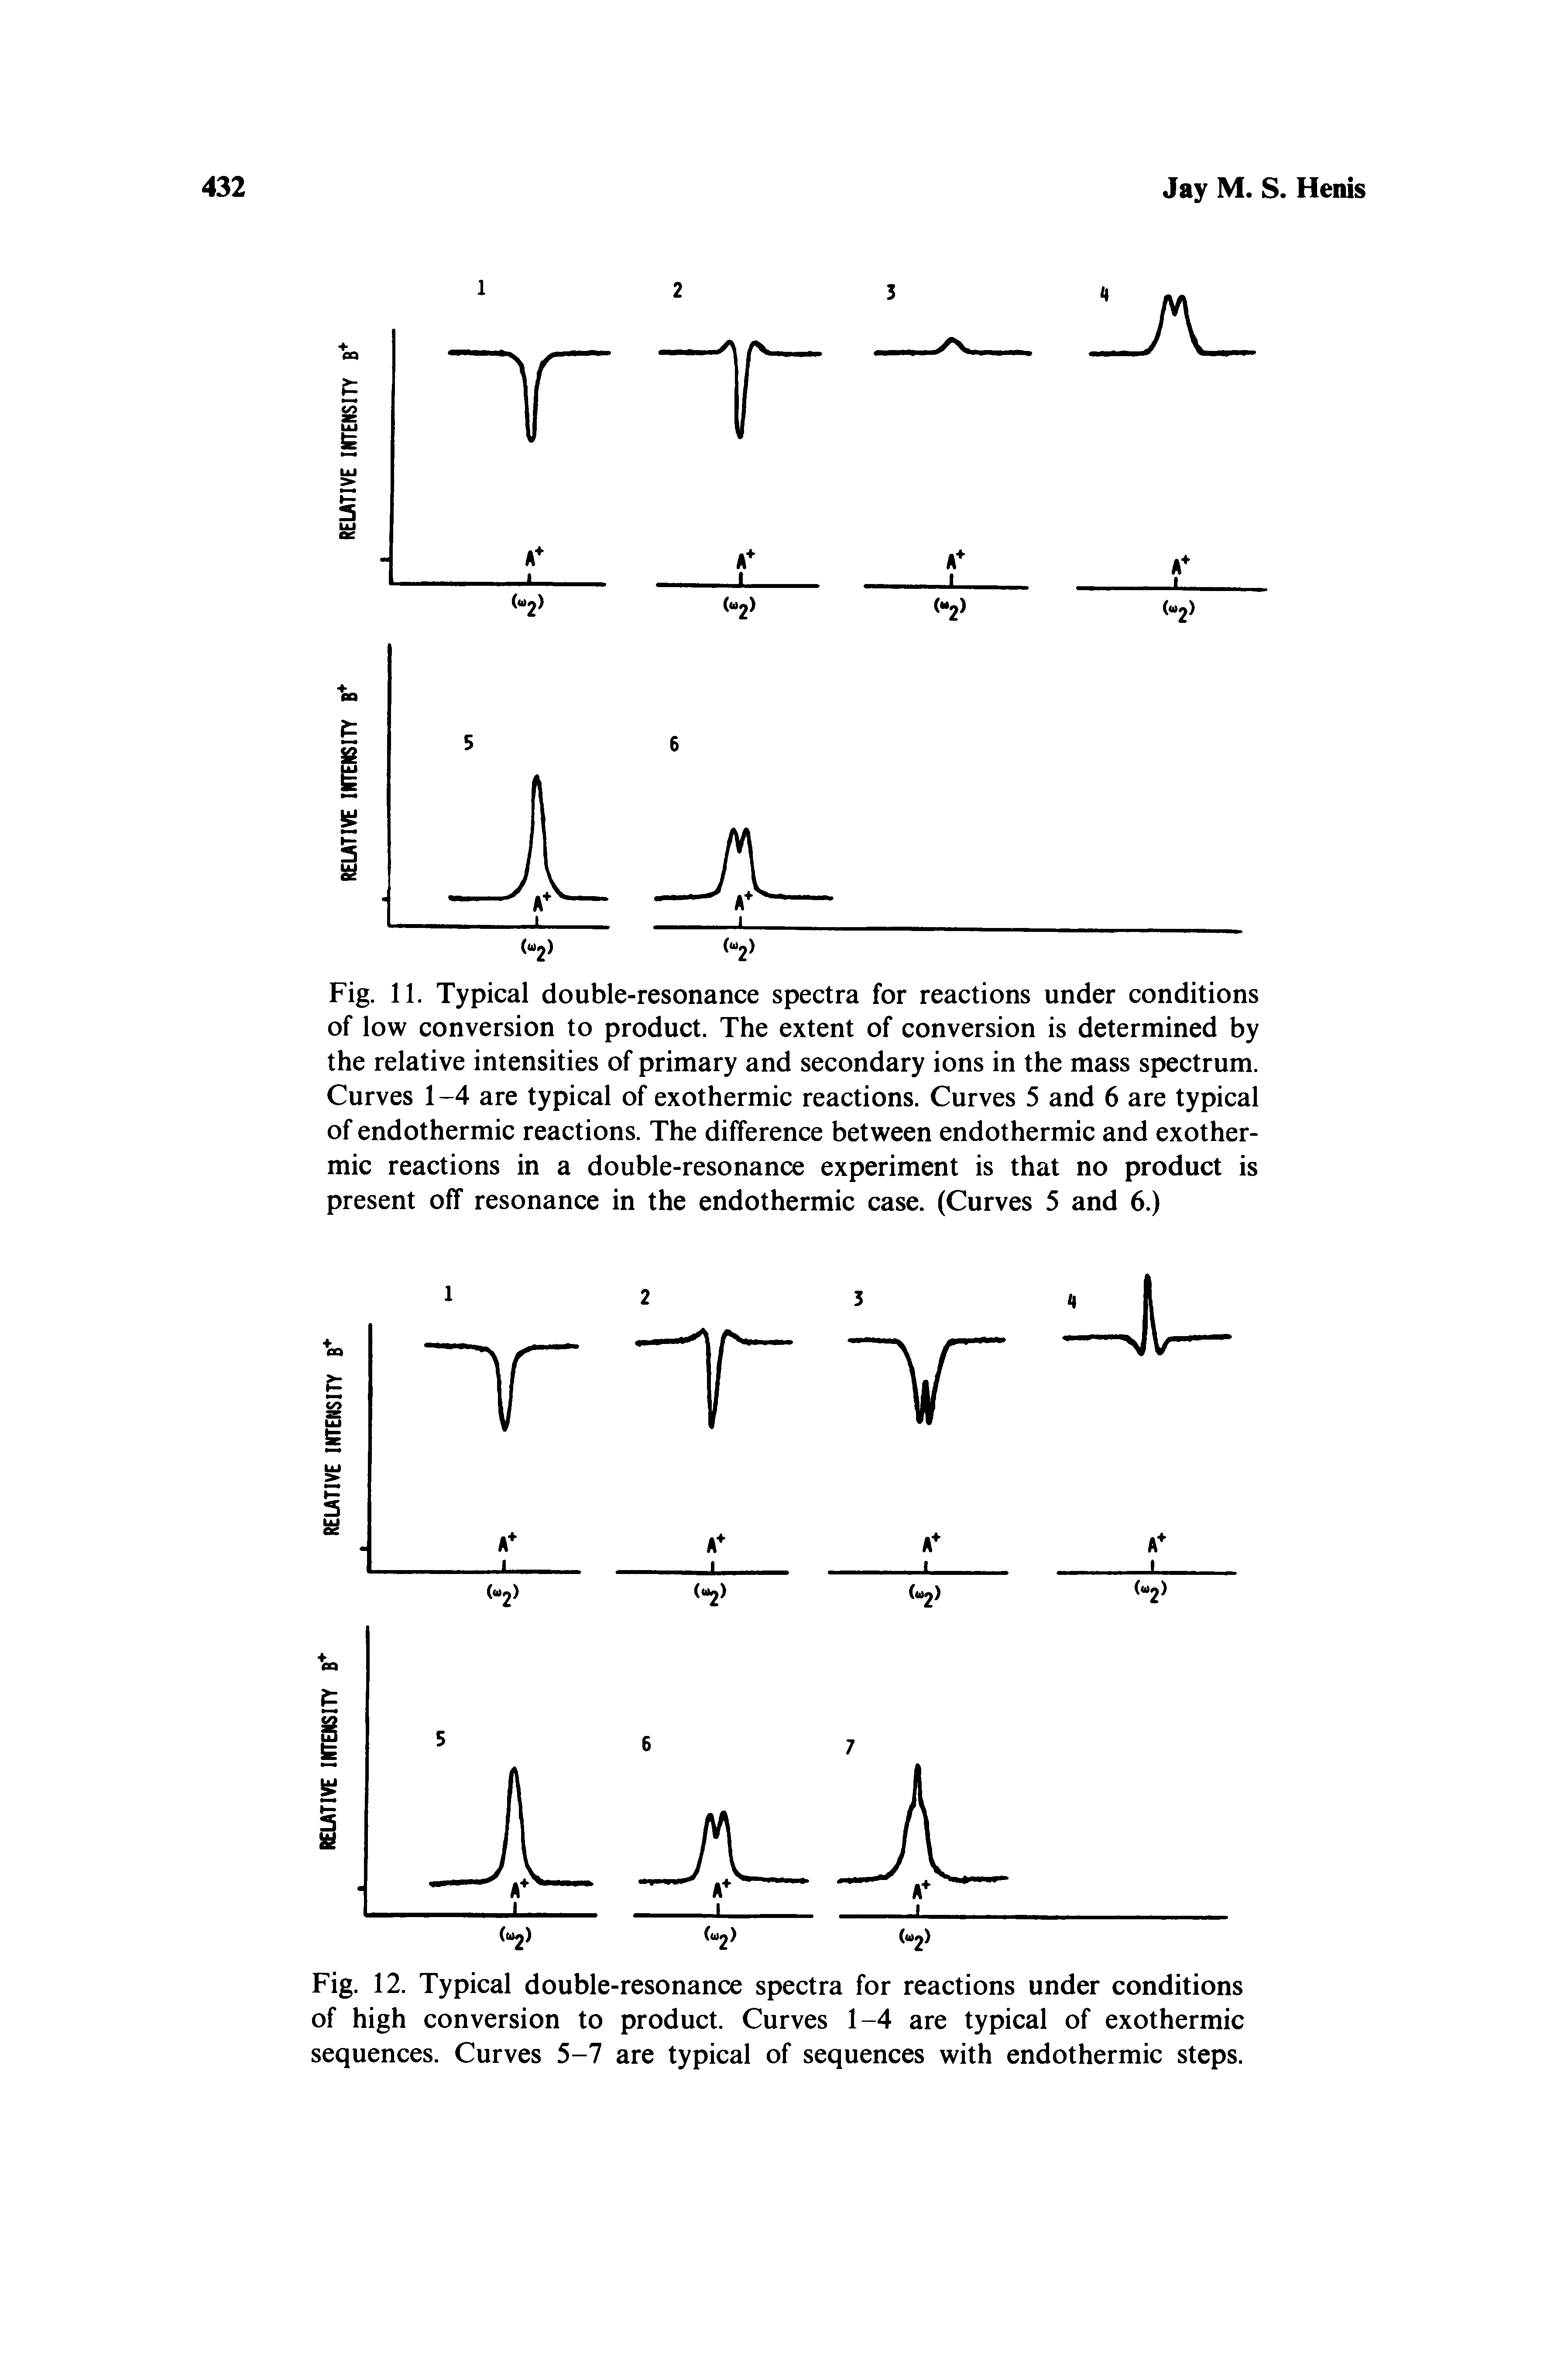 Fig. 12. Typical double-resonance spectra for reactions under conditions of high conversion to product. Curves 1-4 are typical of exothermic sequences. Curves 5-7 are typical of sequences with endothermic steps.